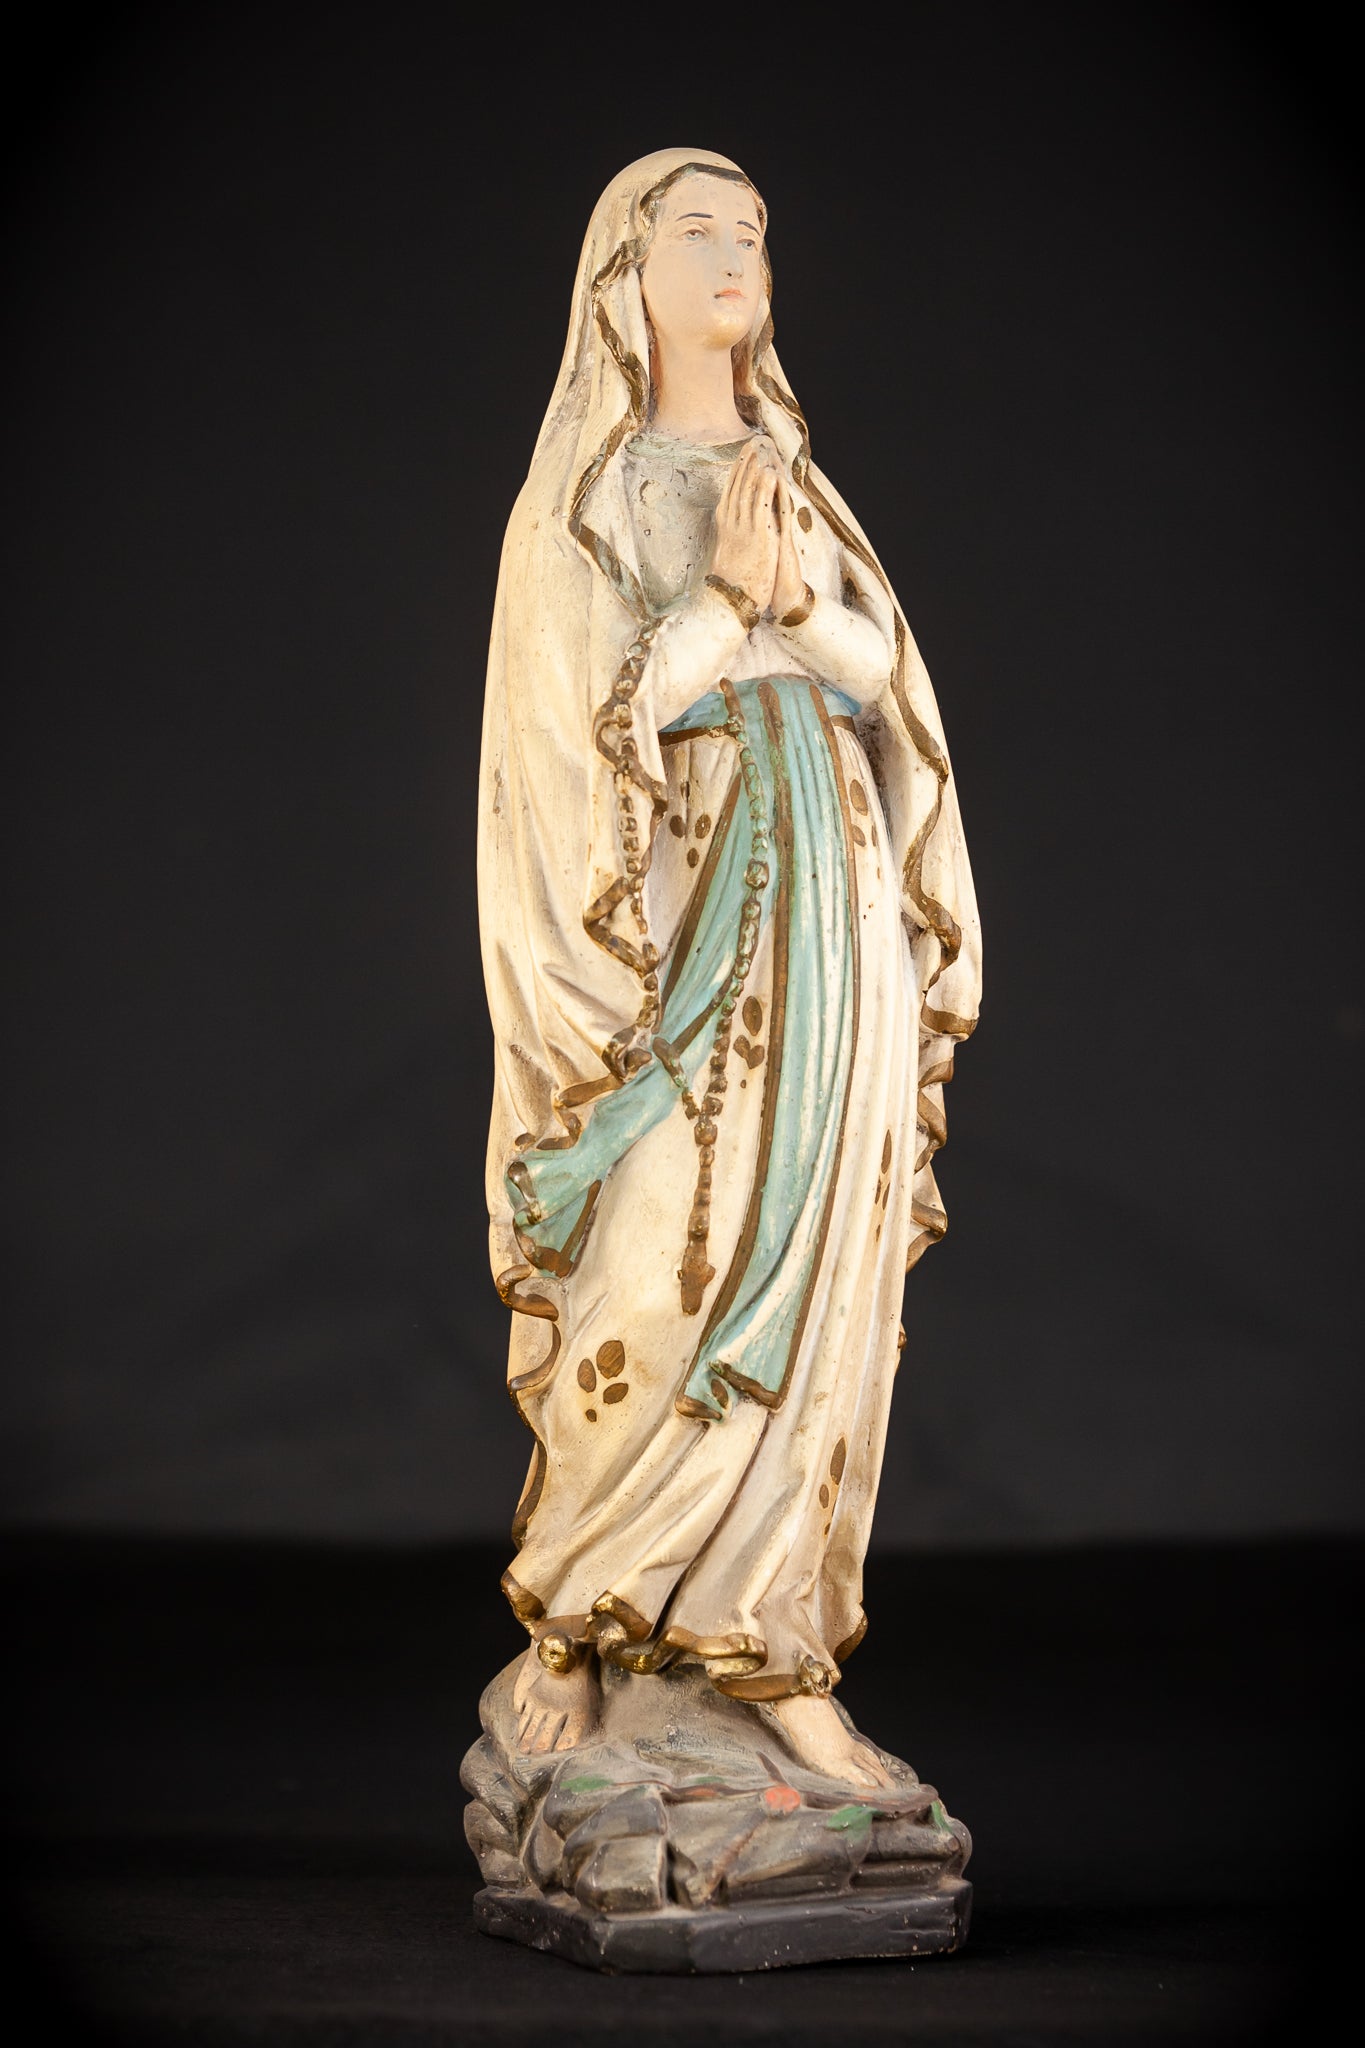 Our Lady of Lourdes Plaster Figure 16.3"